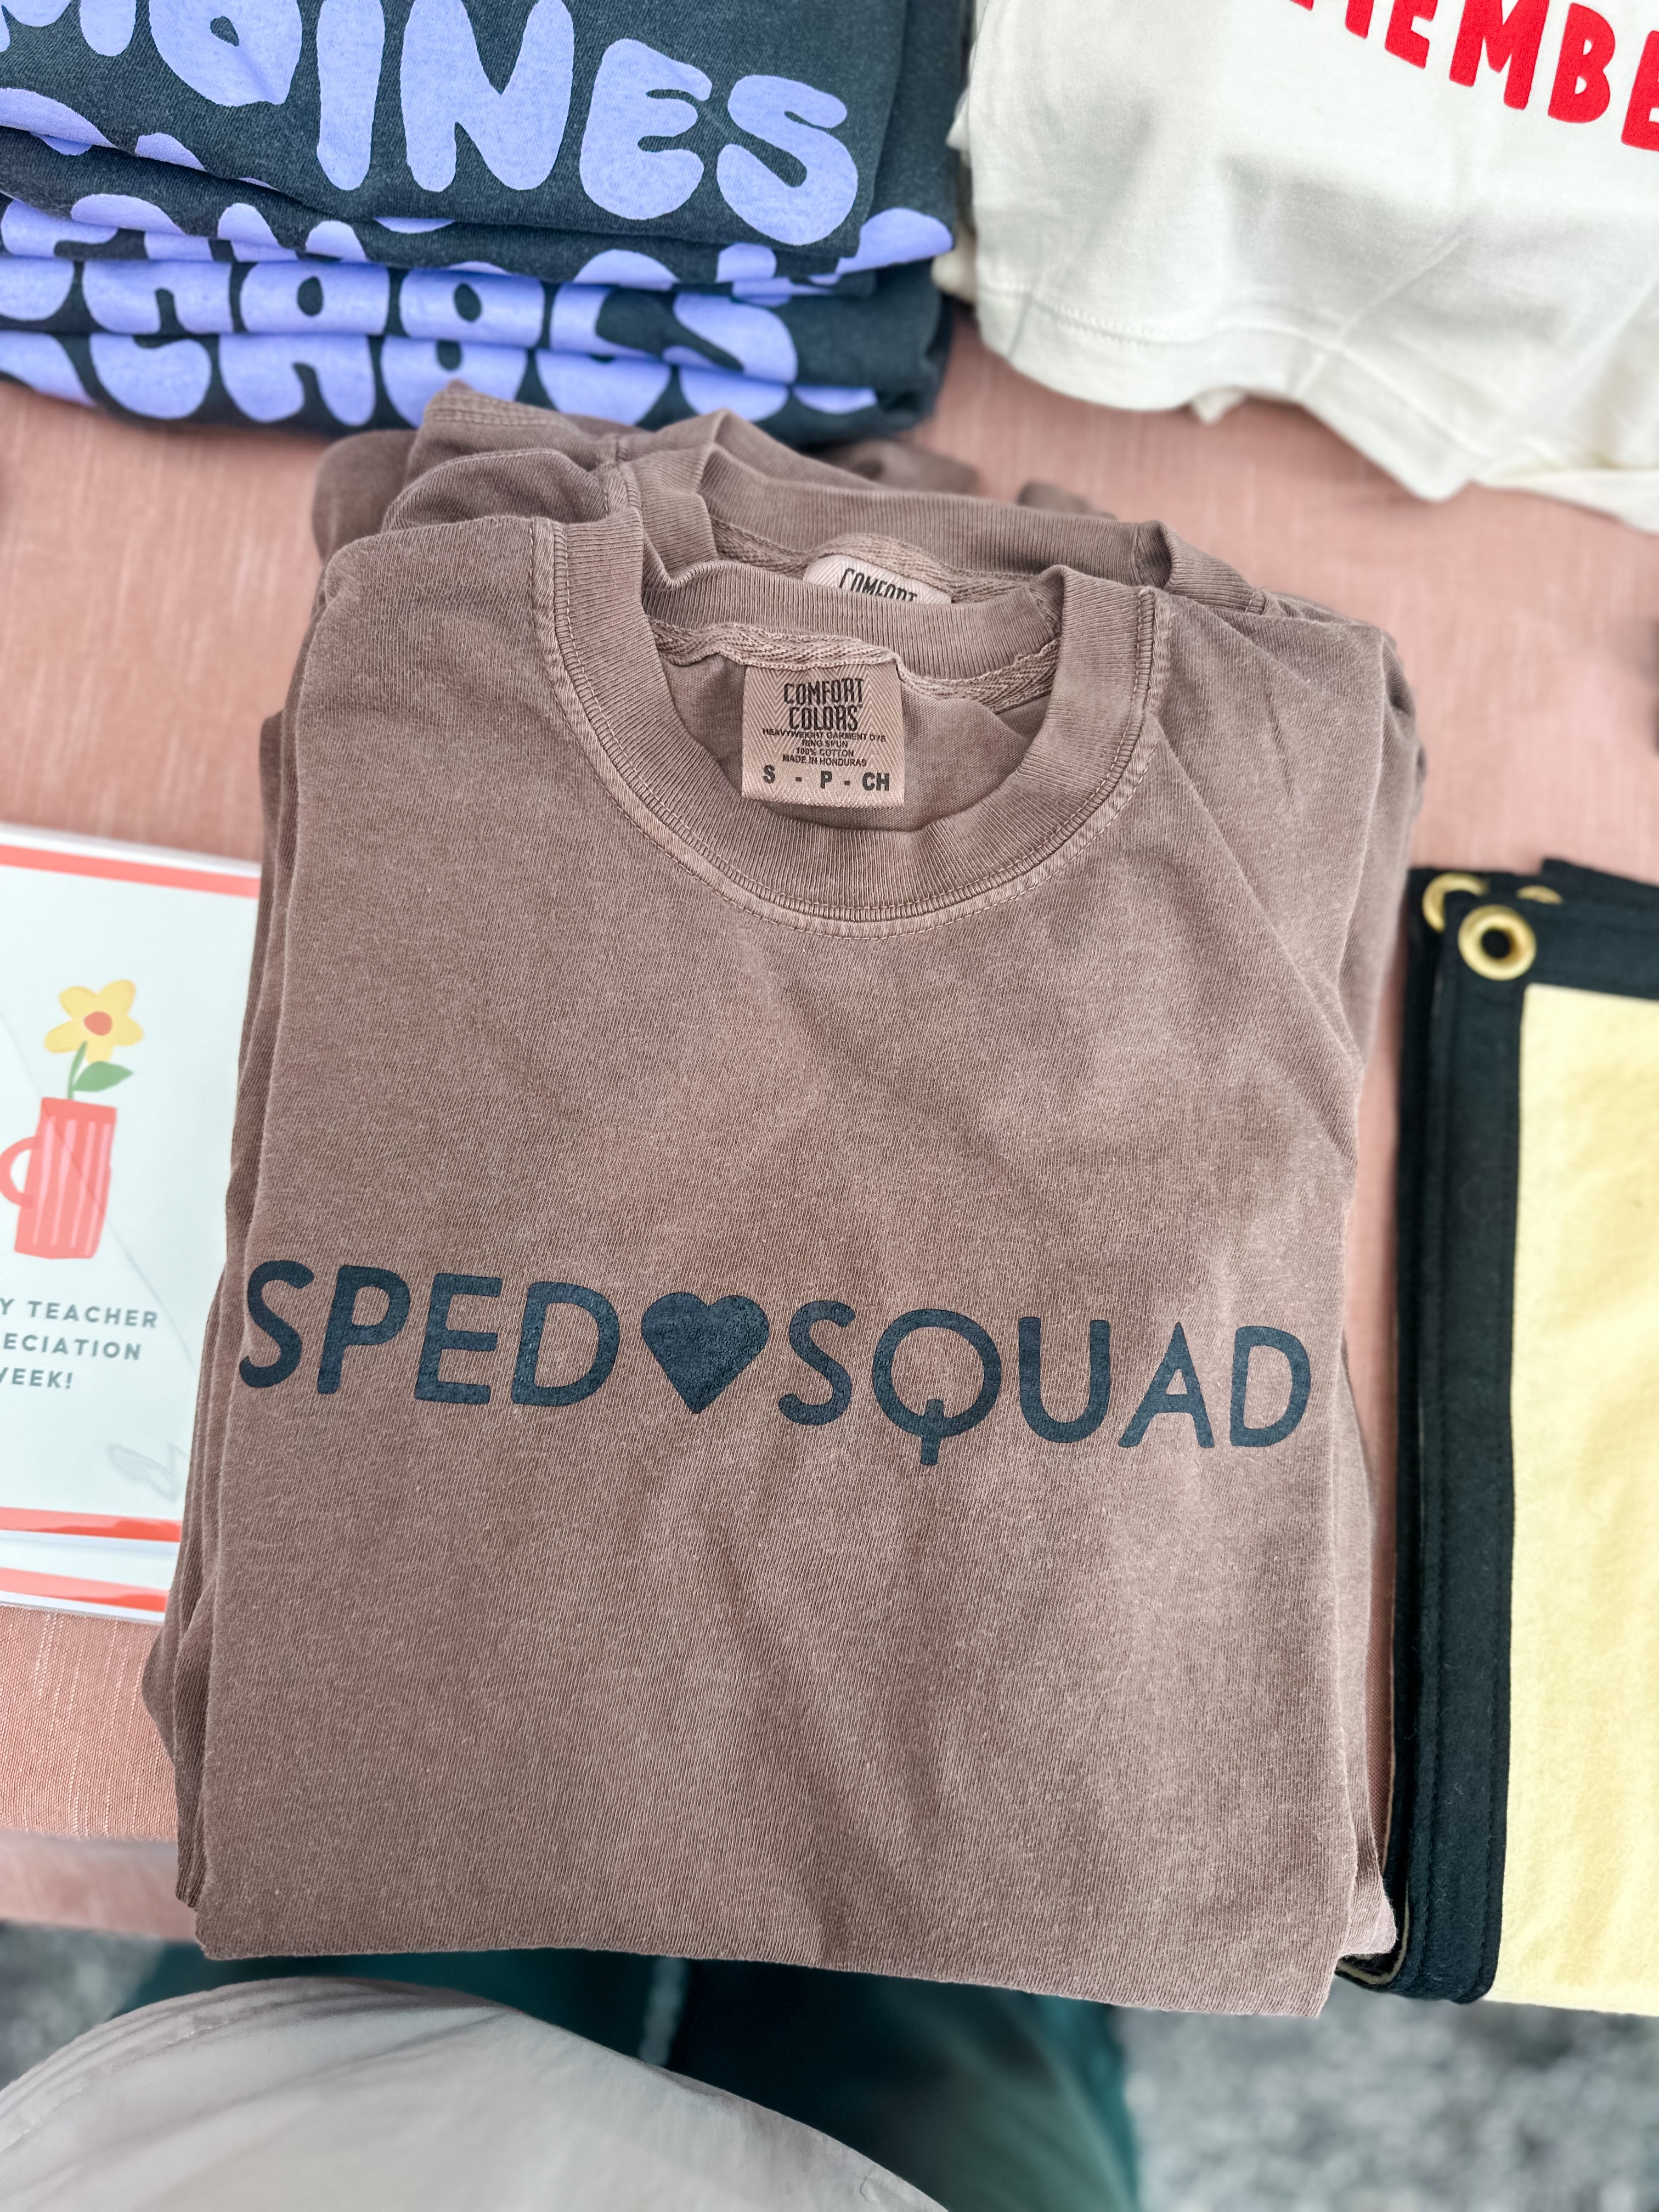 Sped Squad Heart Tee